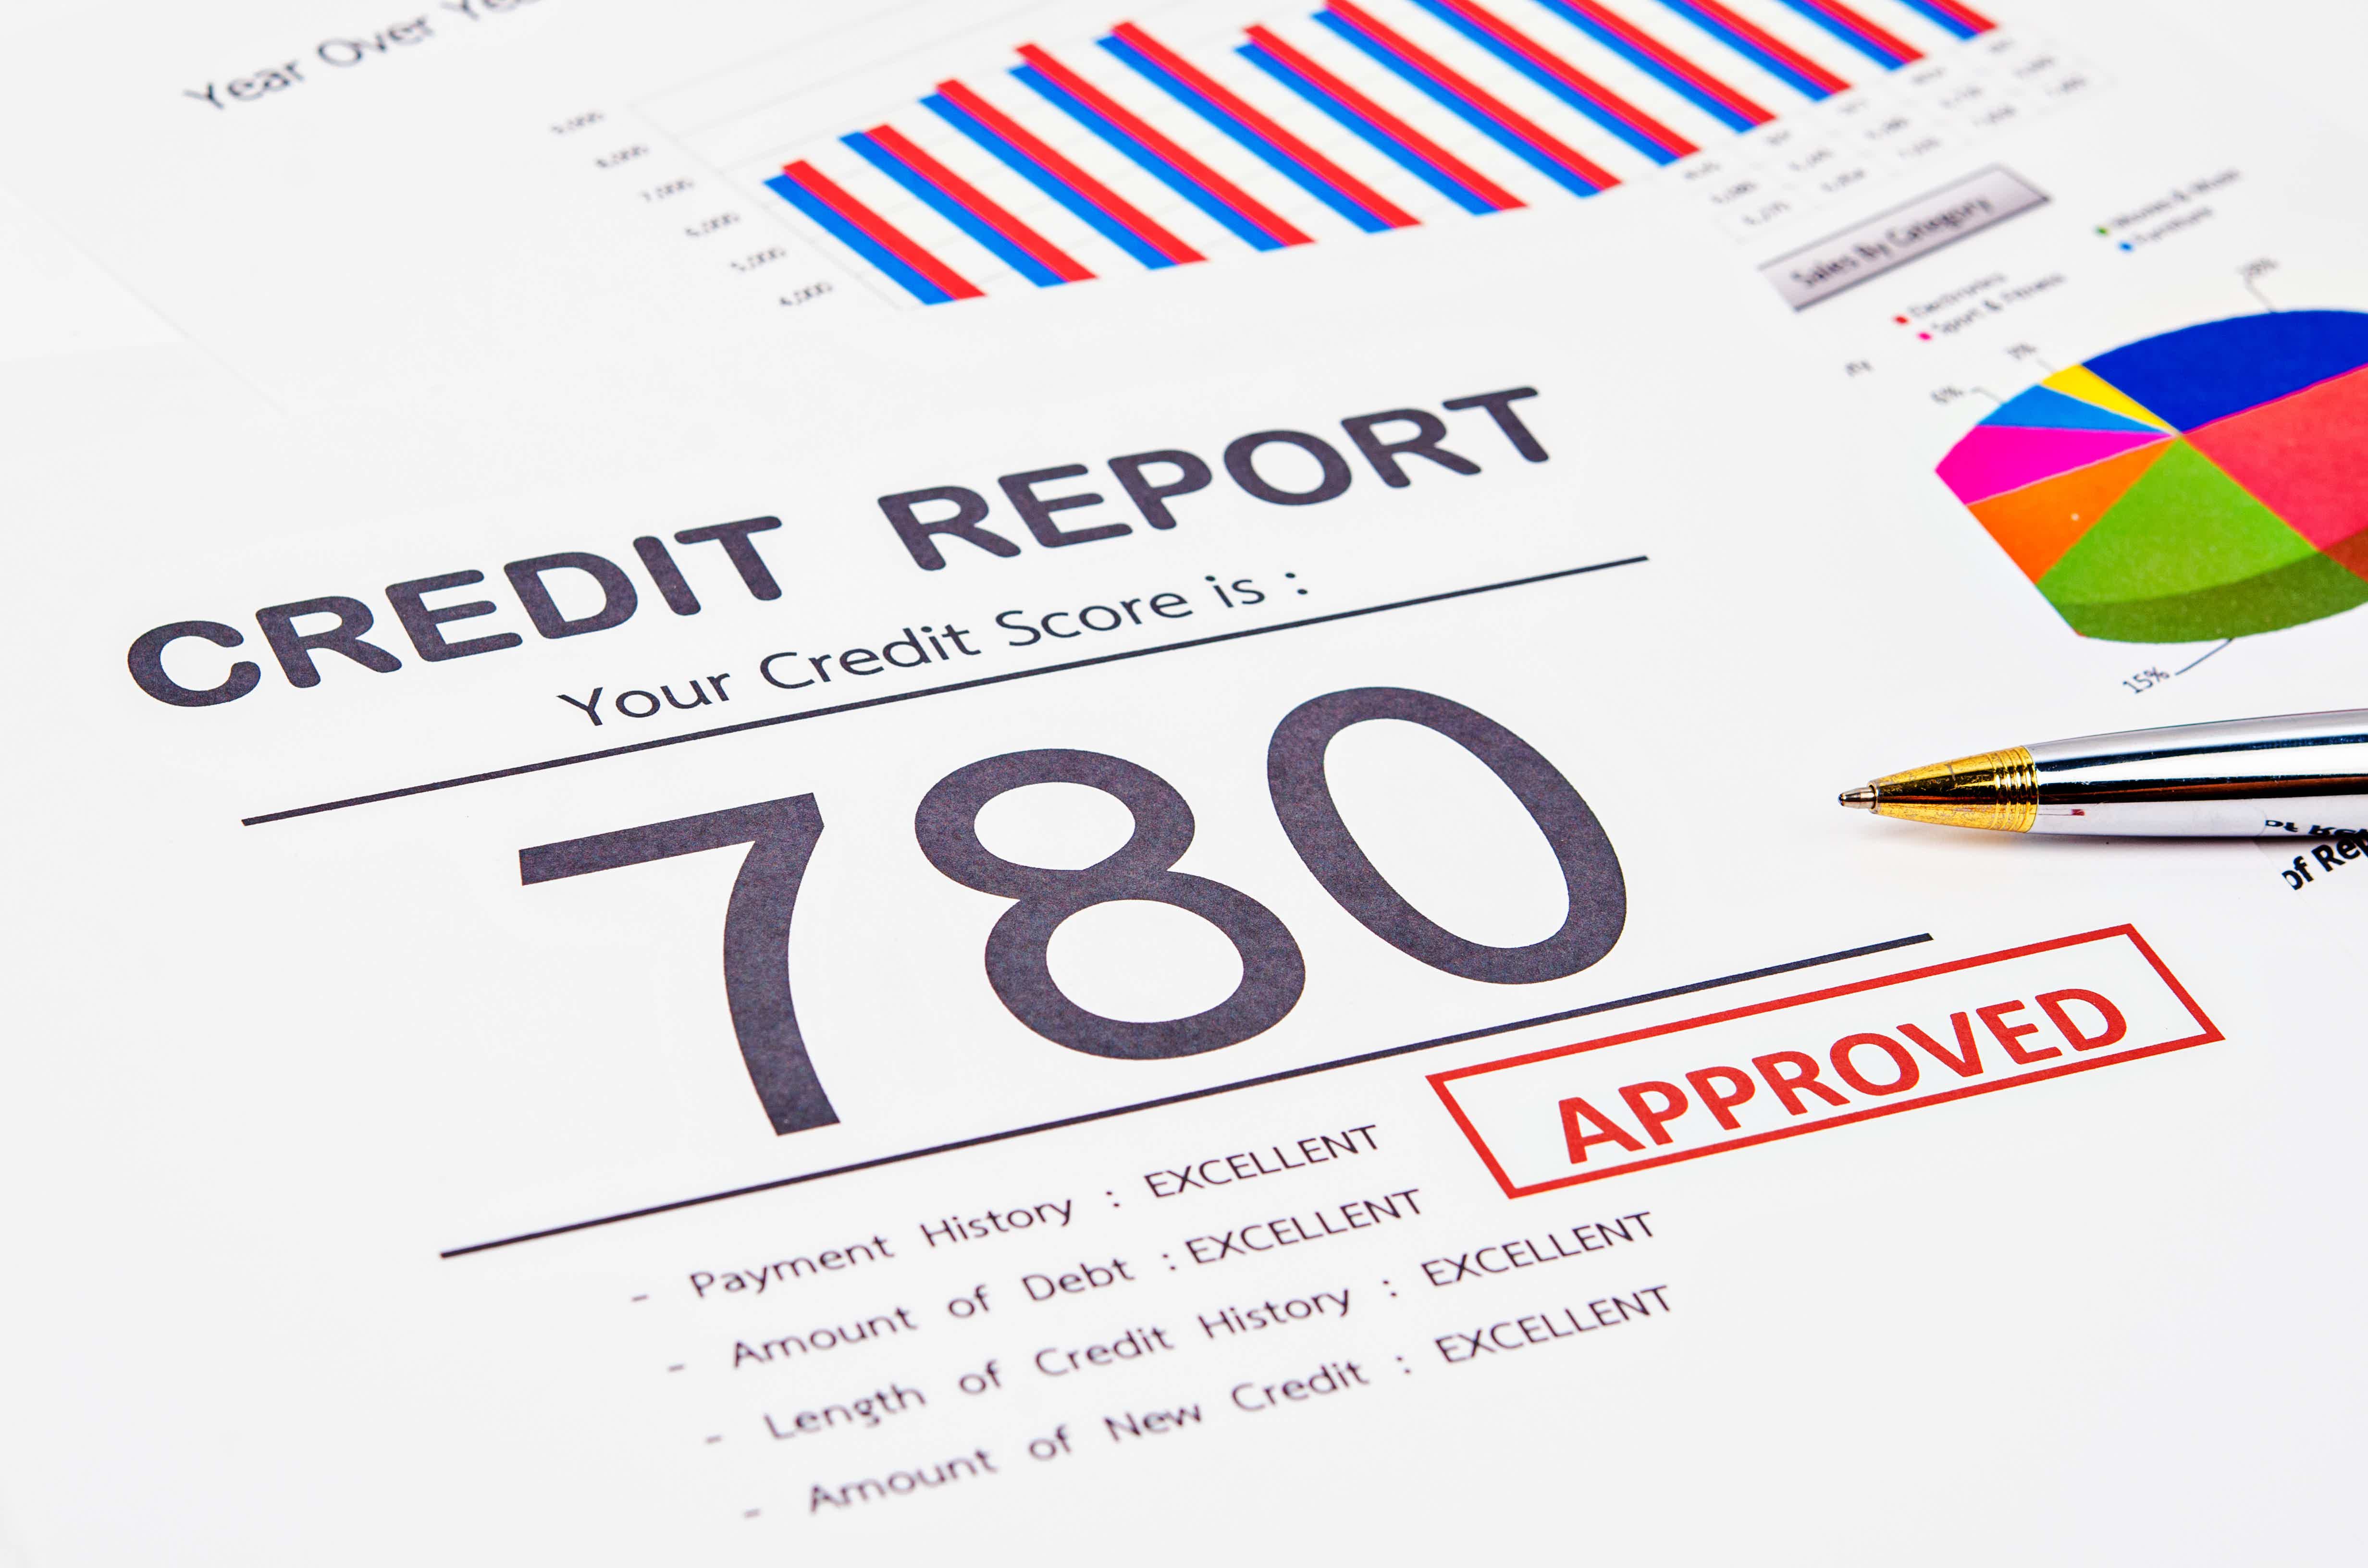 Improve your credit score to get a higher chance of getting approved! Source: Adobe Stock.